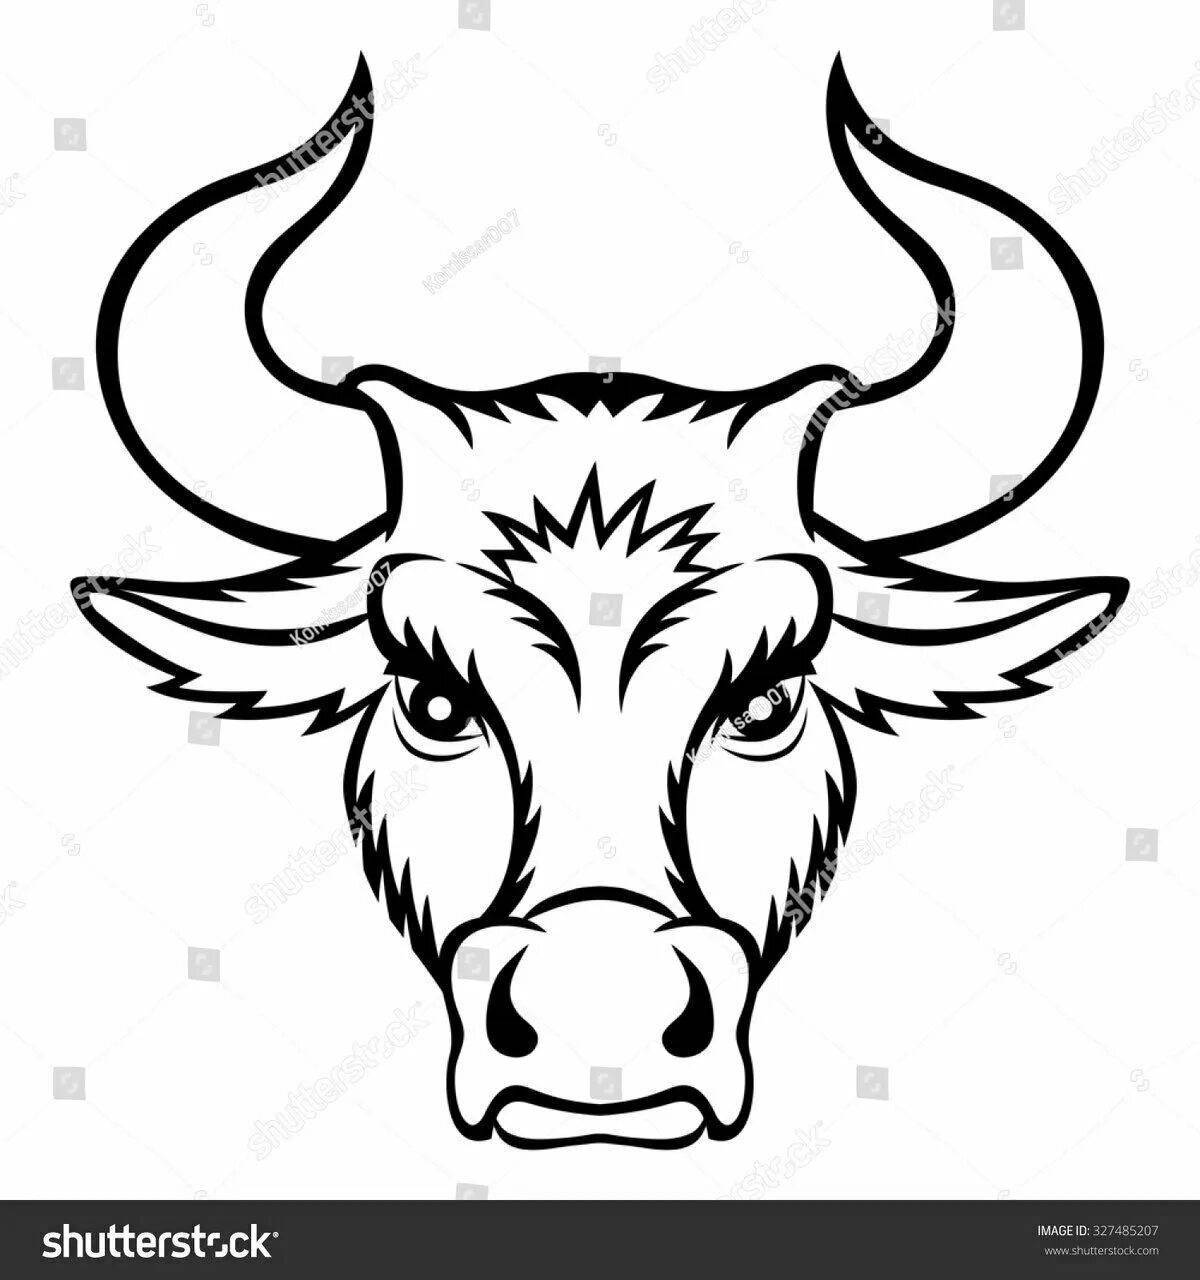 Animated cow head coloring page